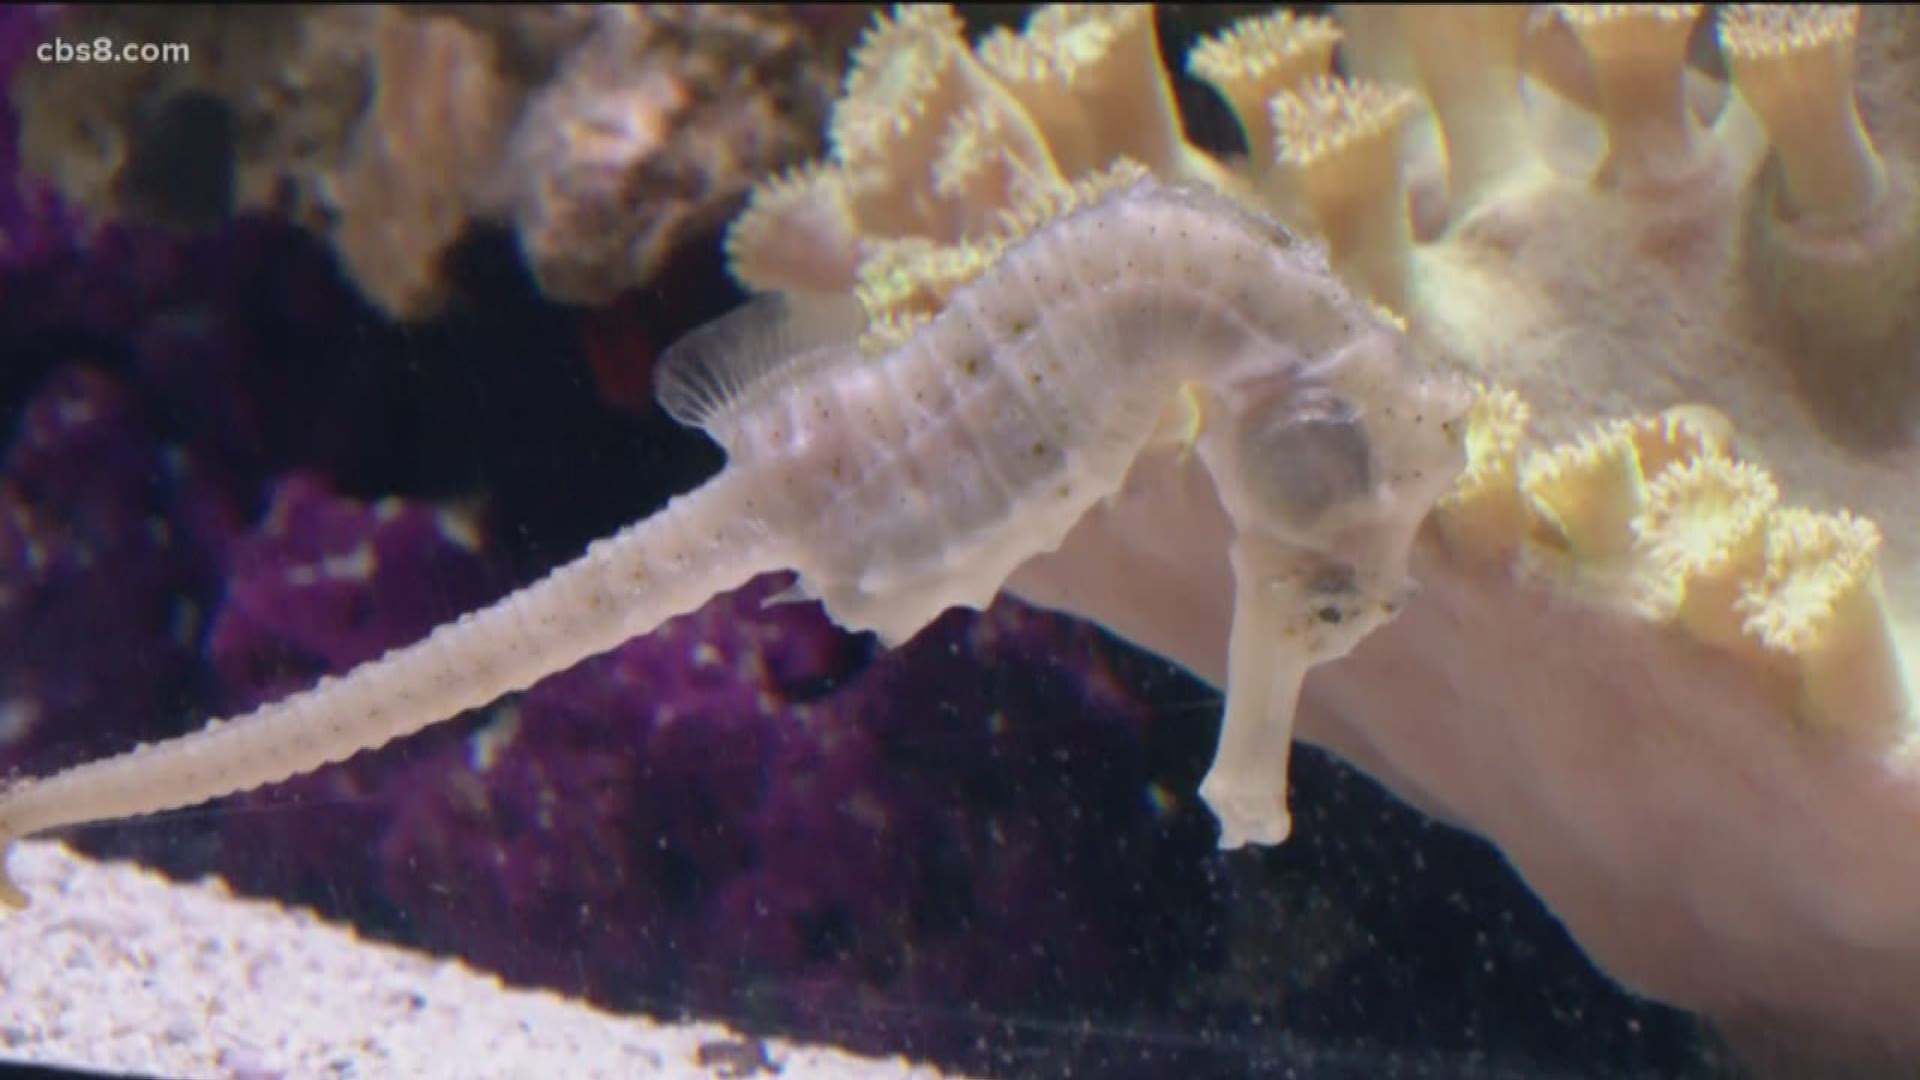 A new exhibit at Birch Aquarium at Scripps is giving guests a look at some of the most unique creatures in the ocean.